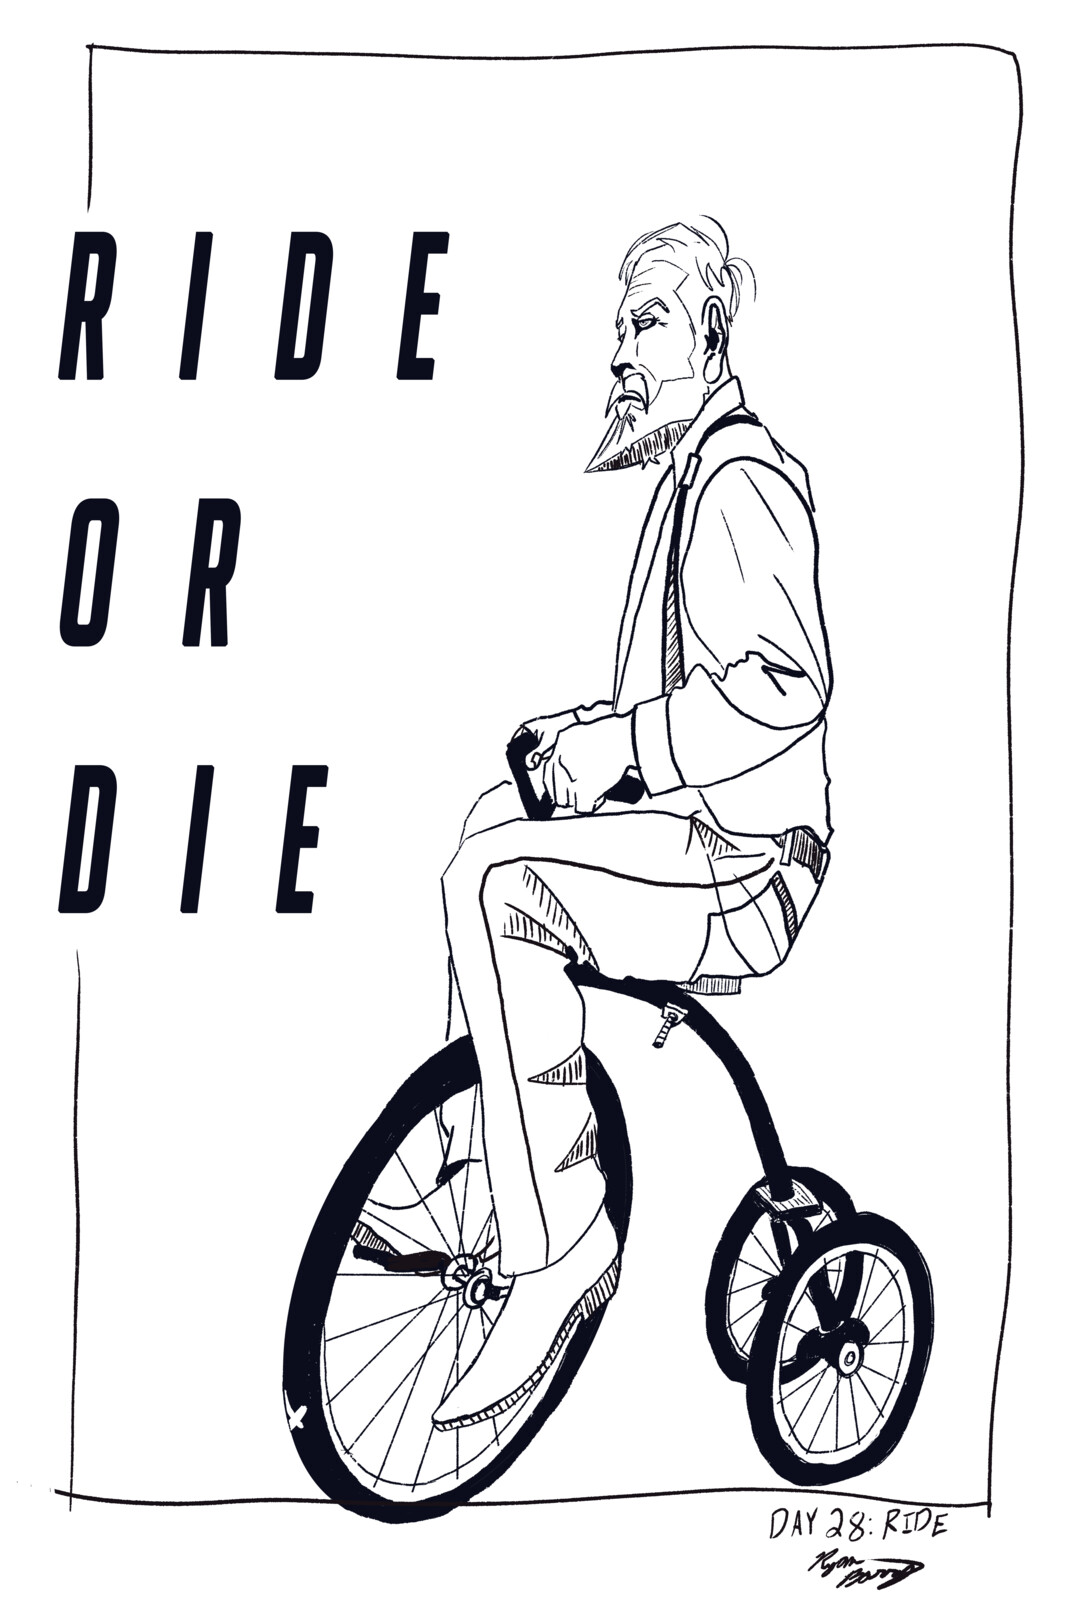 Day 28: Ride